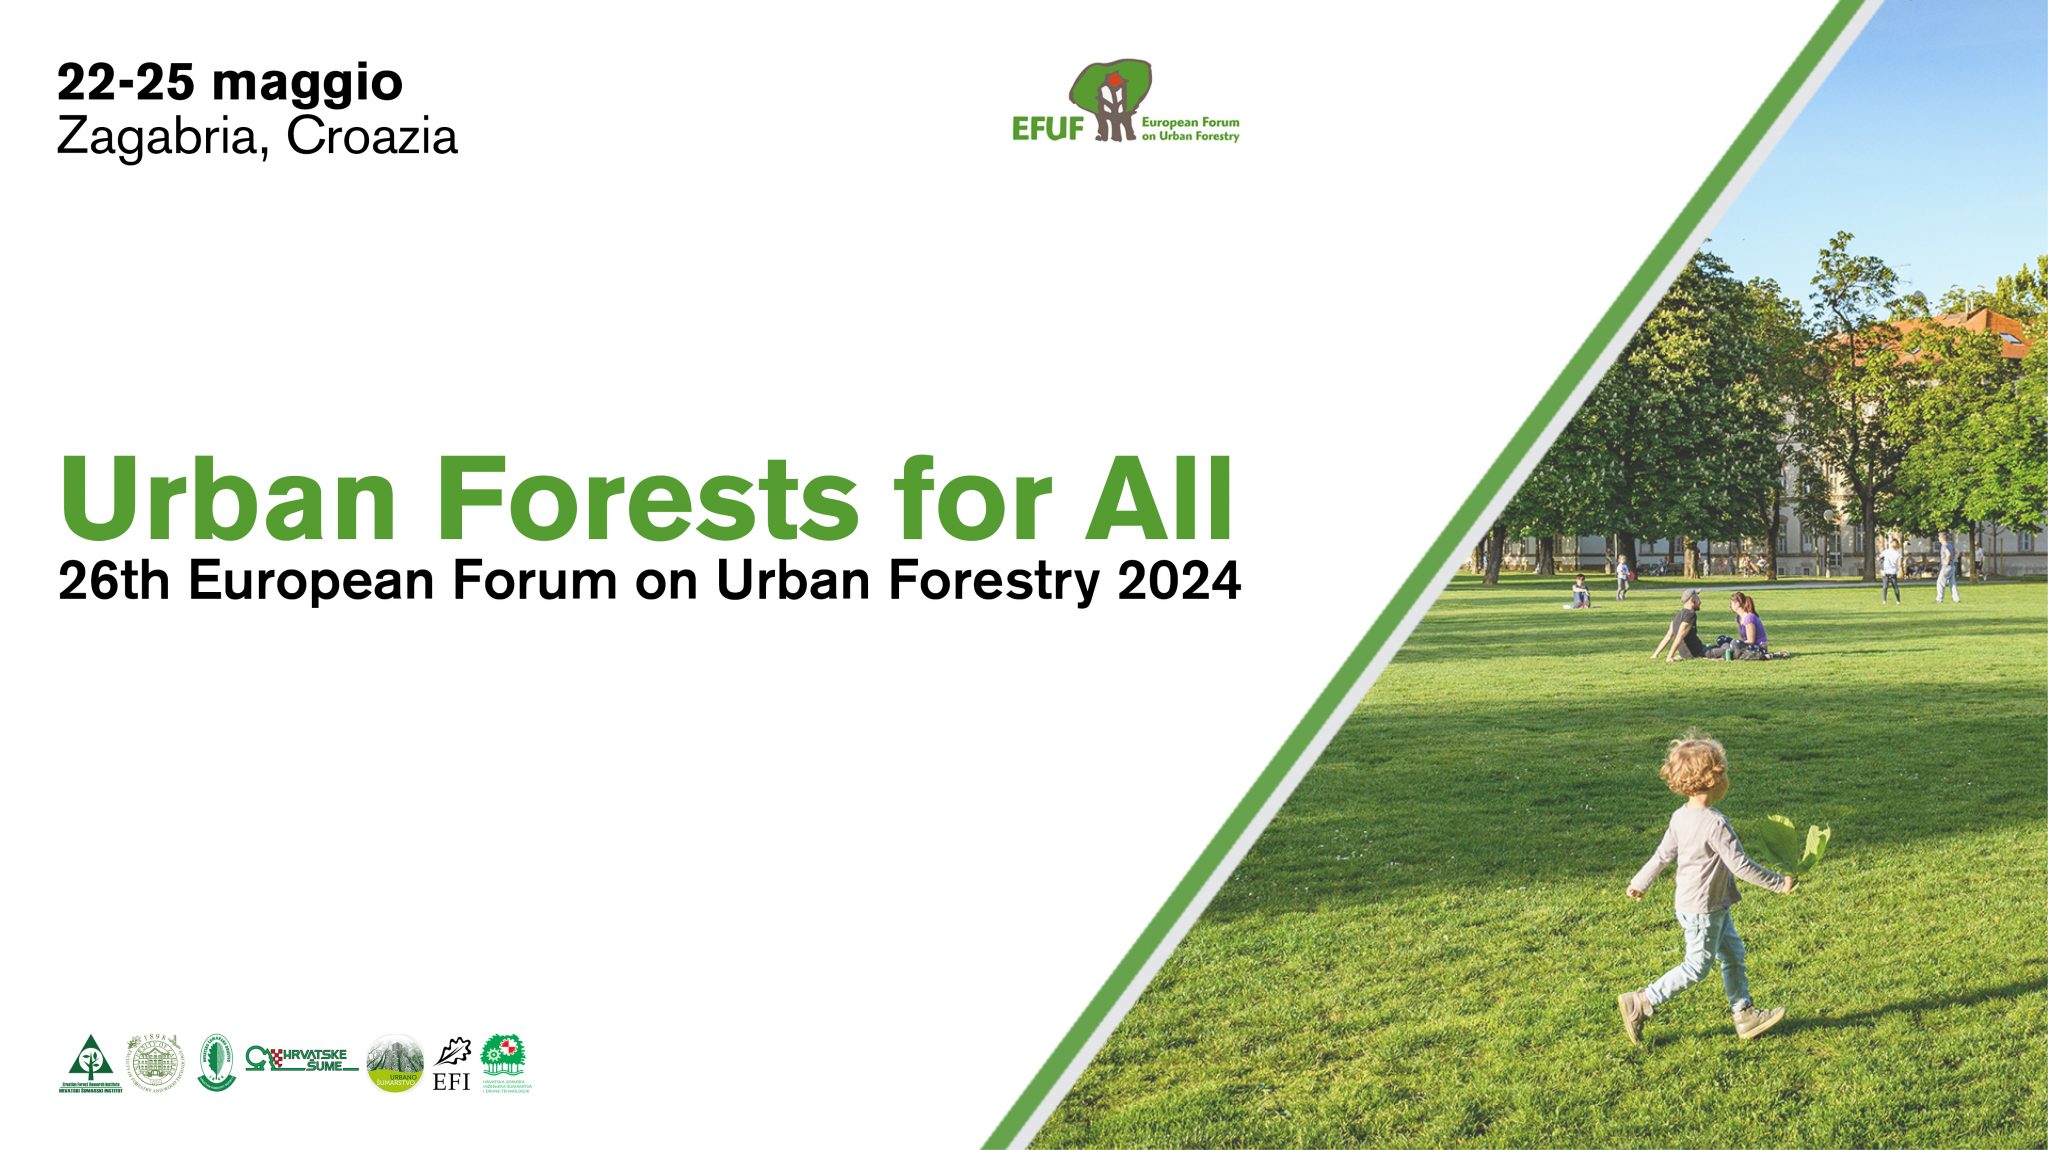 EFUF 2024 Urban Forests For All